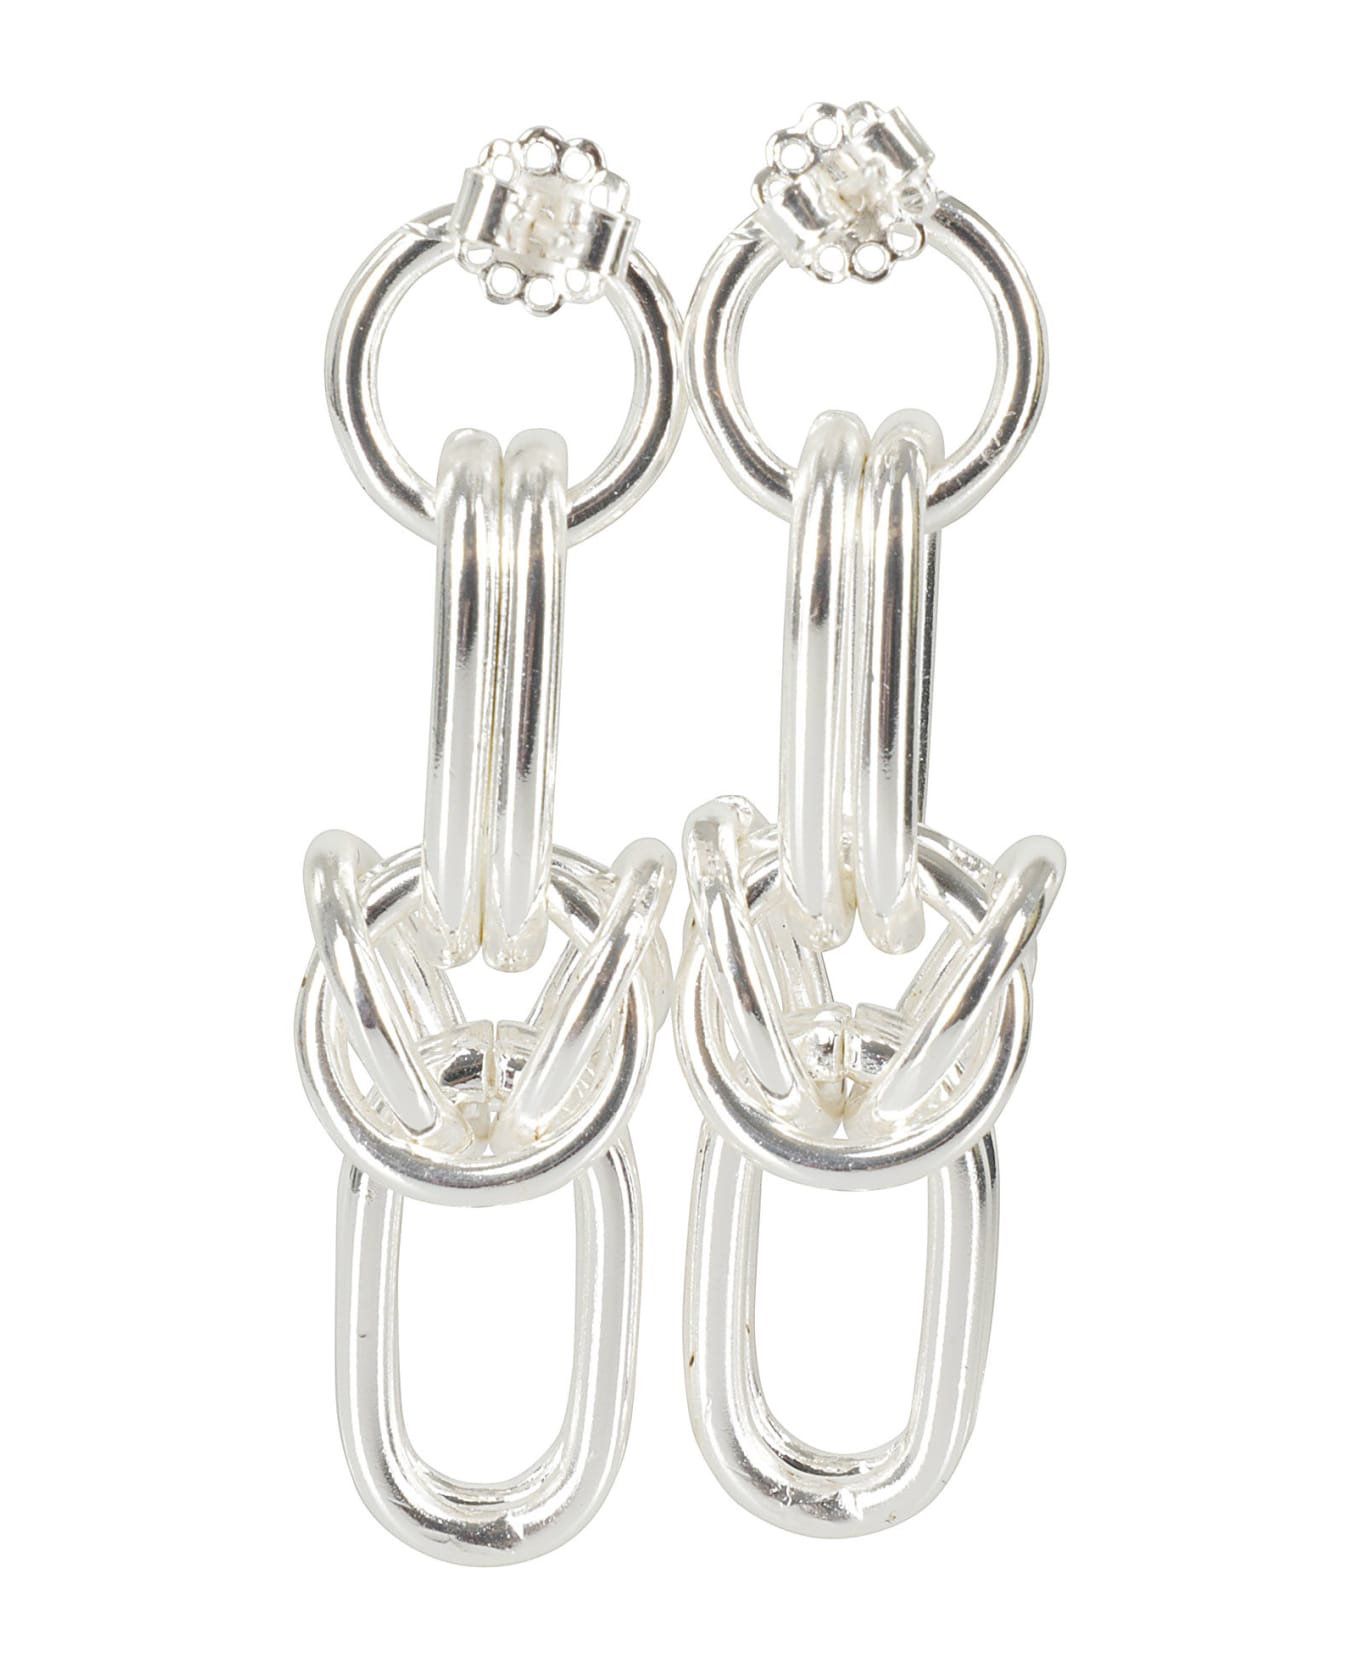 Federica Tosi Earring Cecile - Silver イヤリング